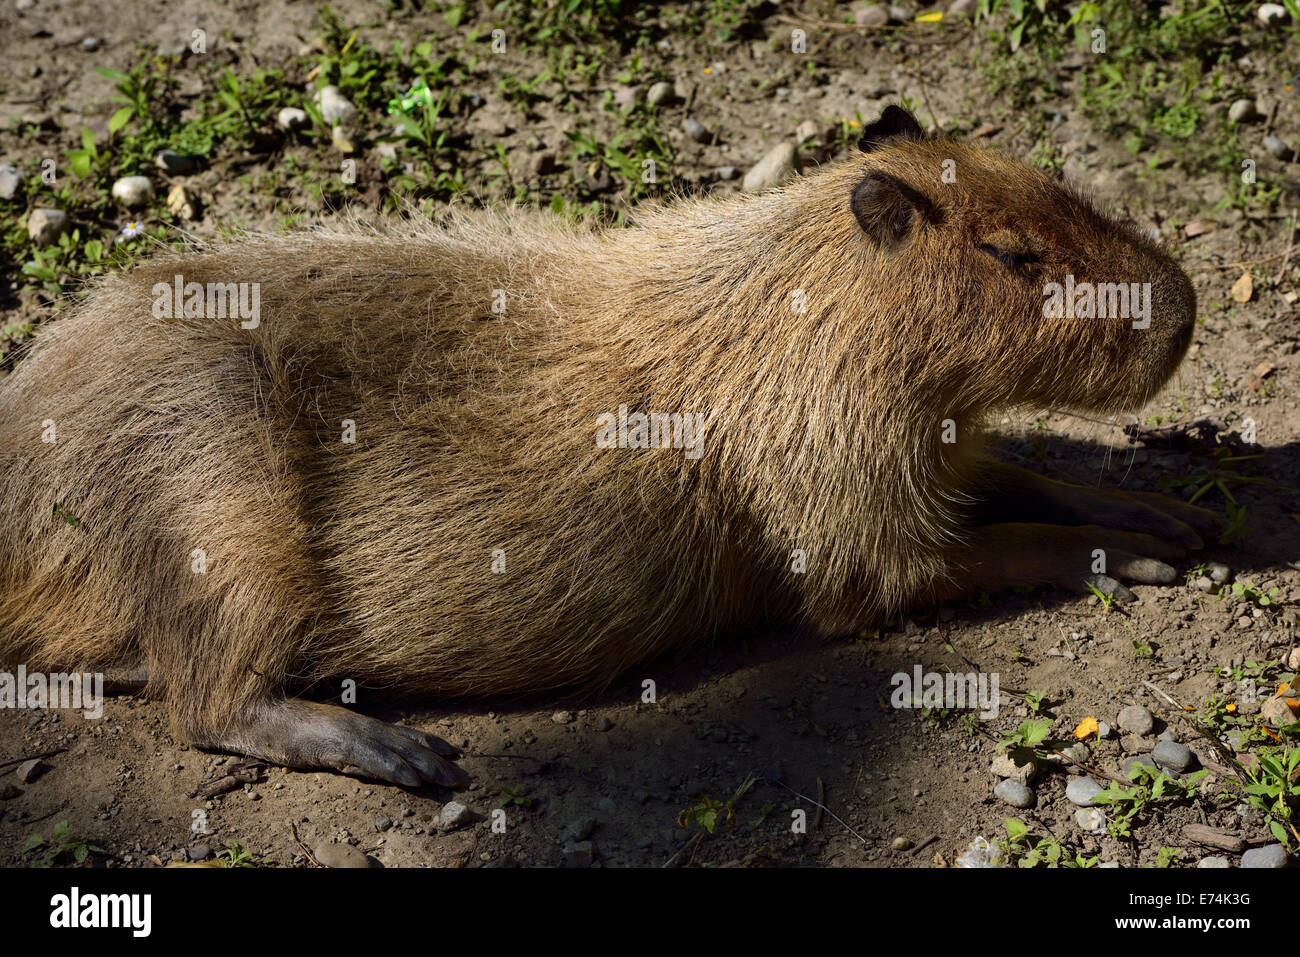 Lounging South American Capybara the largest rodent in the world Stock Photo